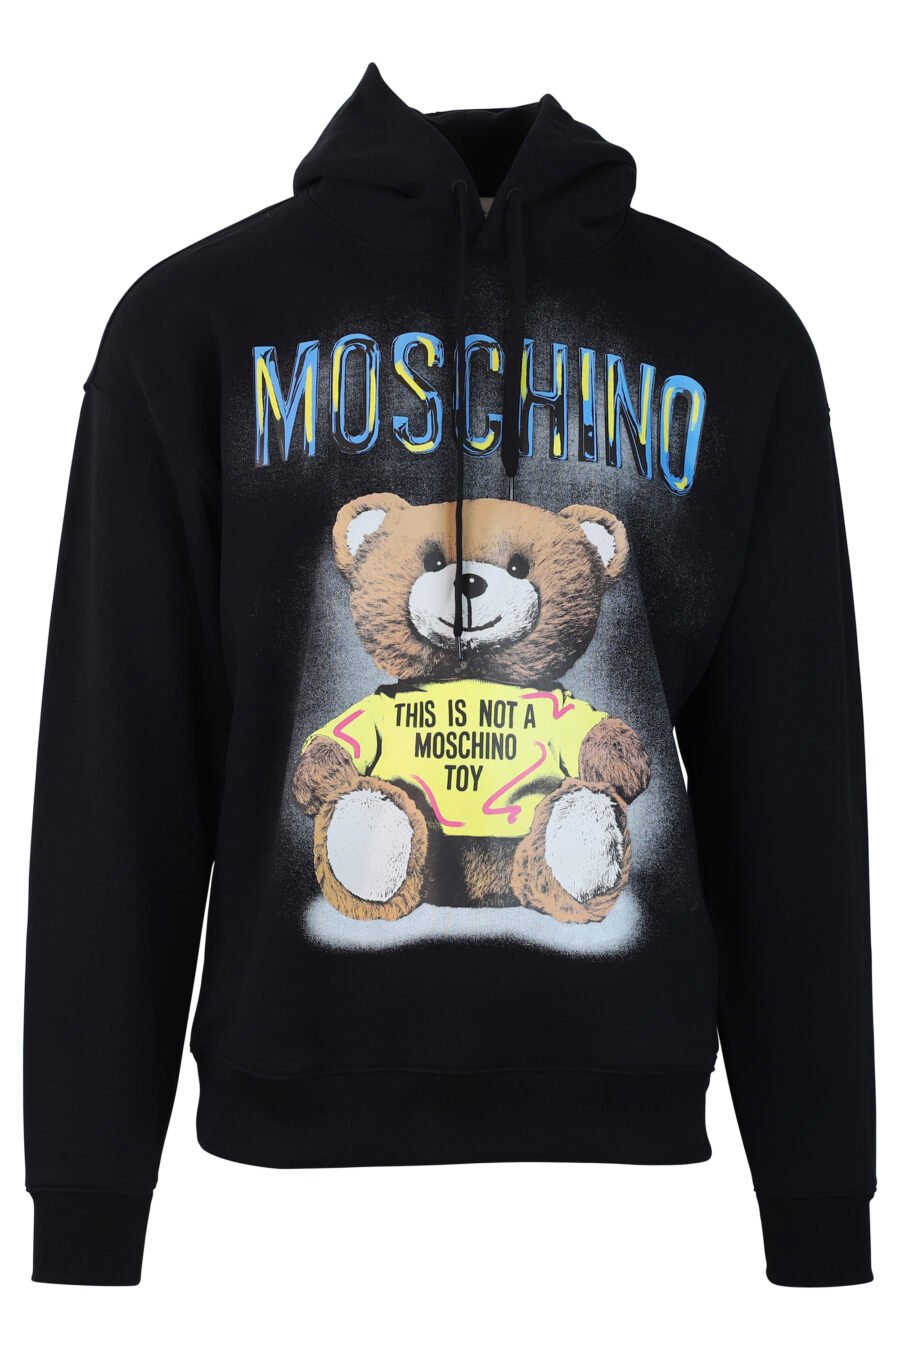 Sudadera negra con capucha y maxilogo oso "this is not a moschino toy" - IMG 0709